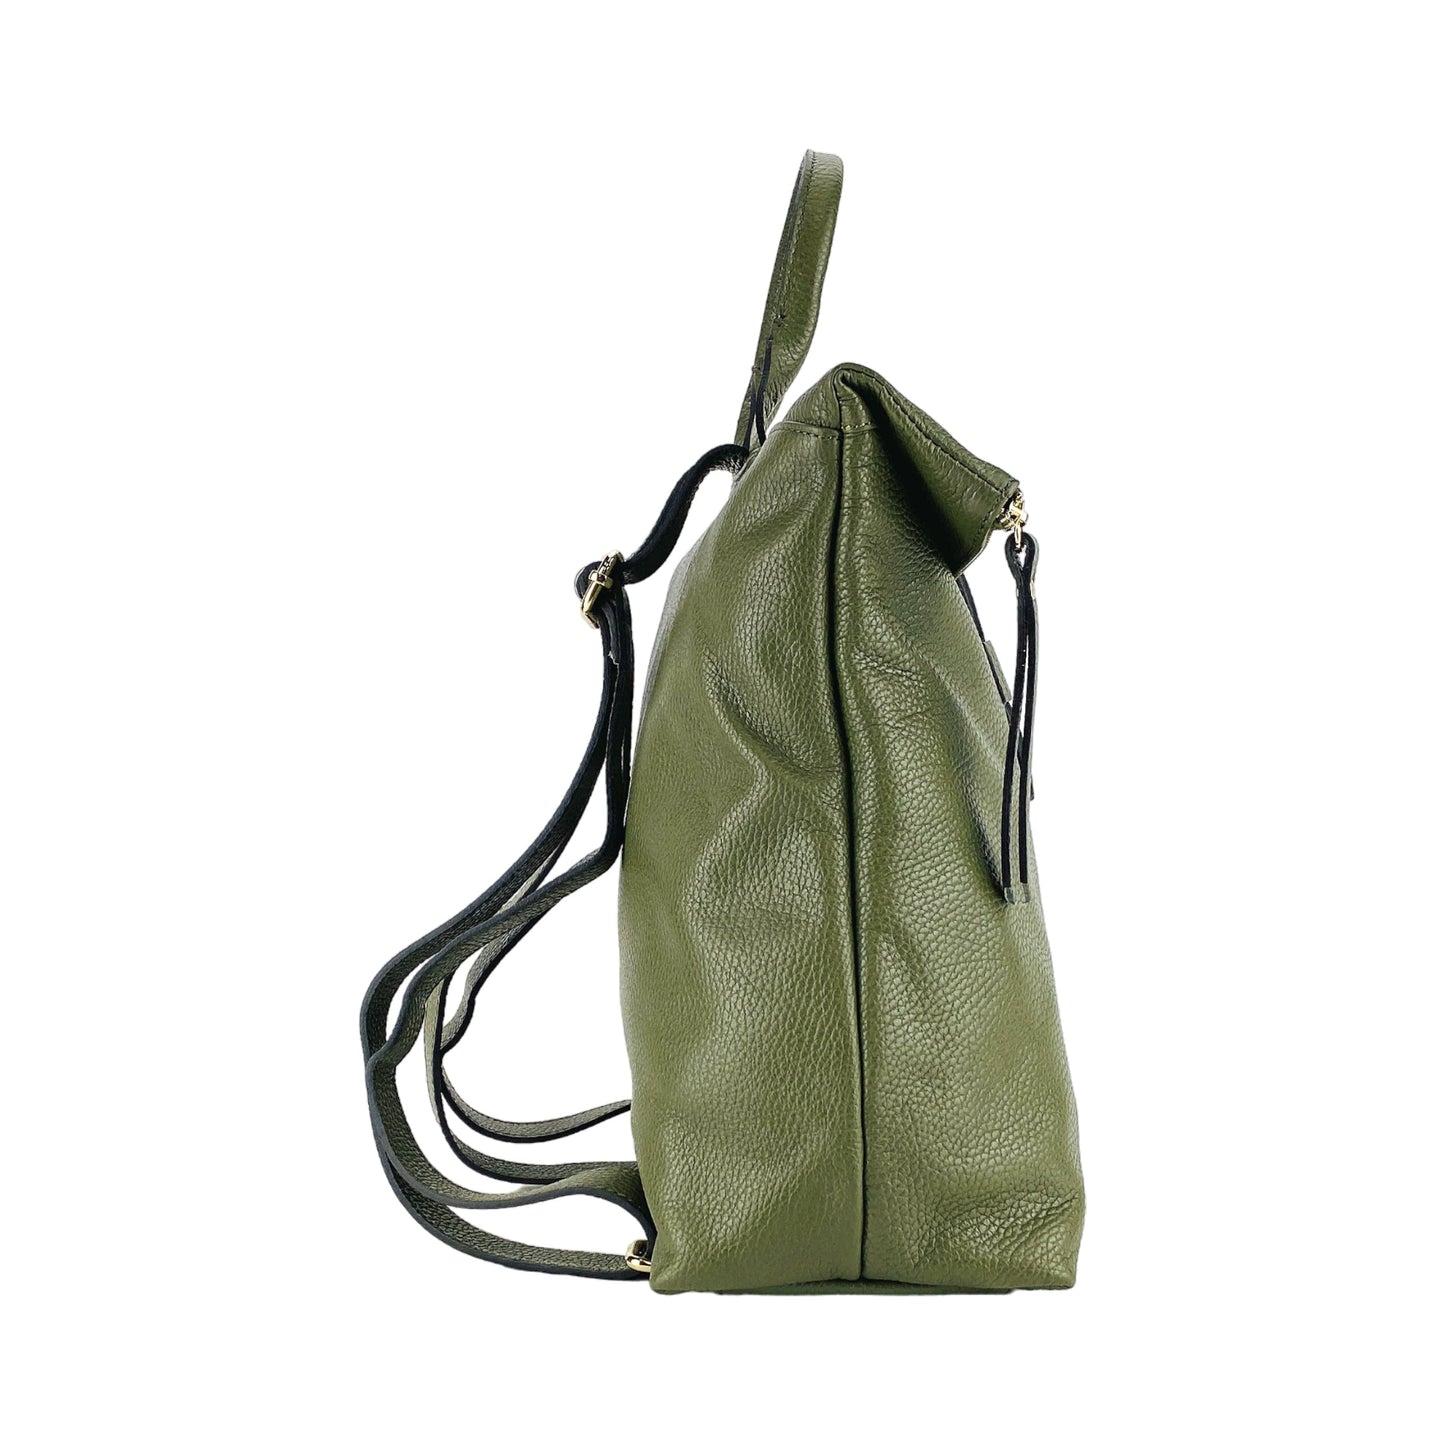 RB1021E | Soft women's backpack in genuine leather Made in Italy with adjustable shoulder straps. Zipper and accessories in shiny gold metal - Green color - Dimensions: 30 x 34 x 10.5 cm-3